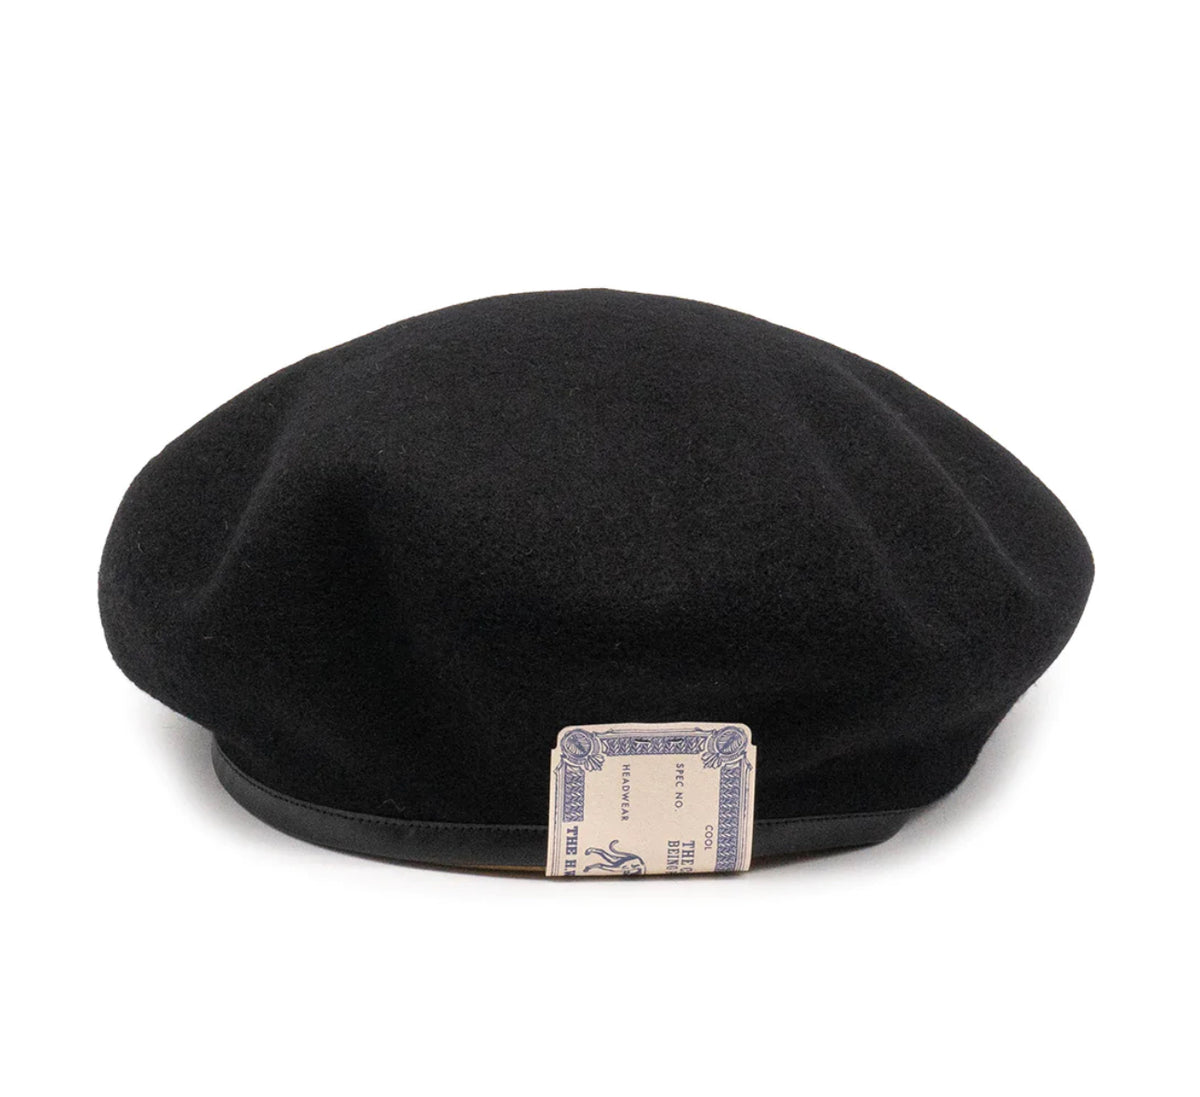 H W DOG & CO Leather Beret D-00626 